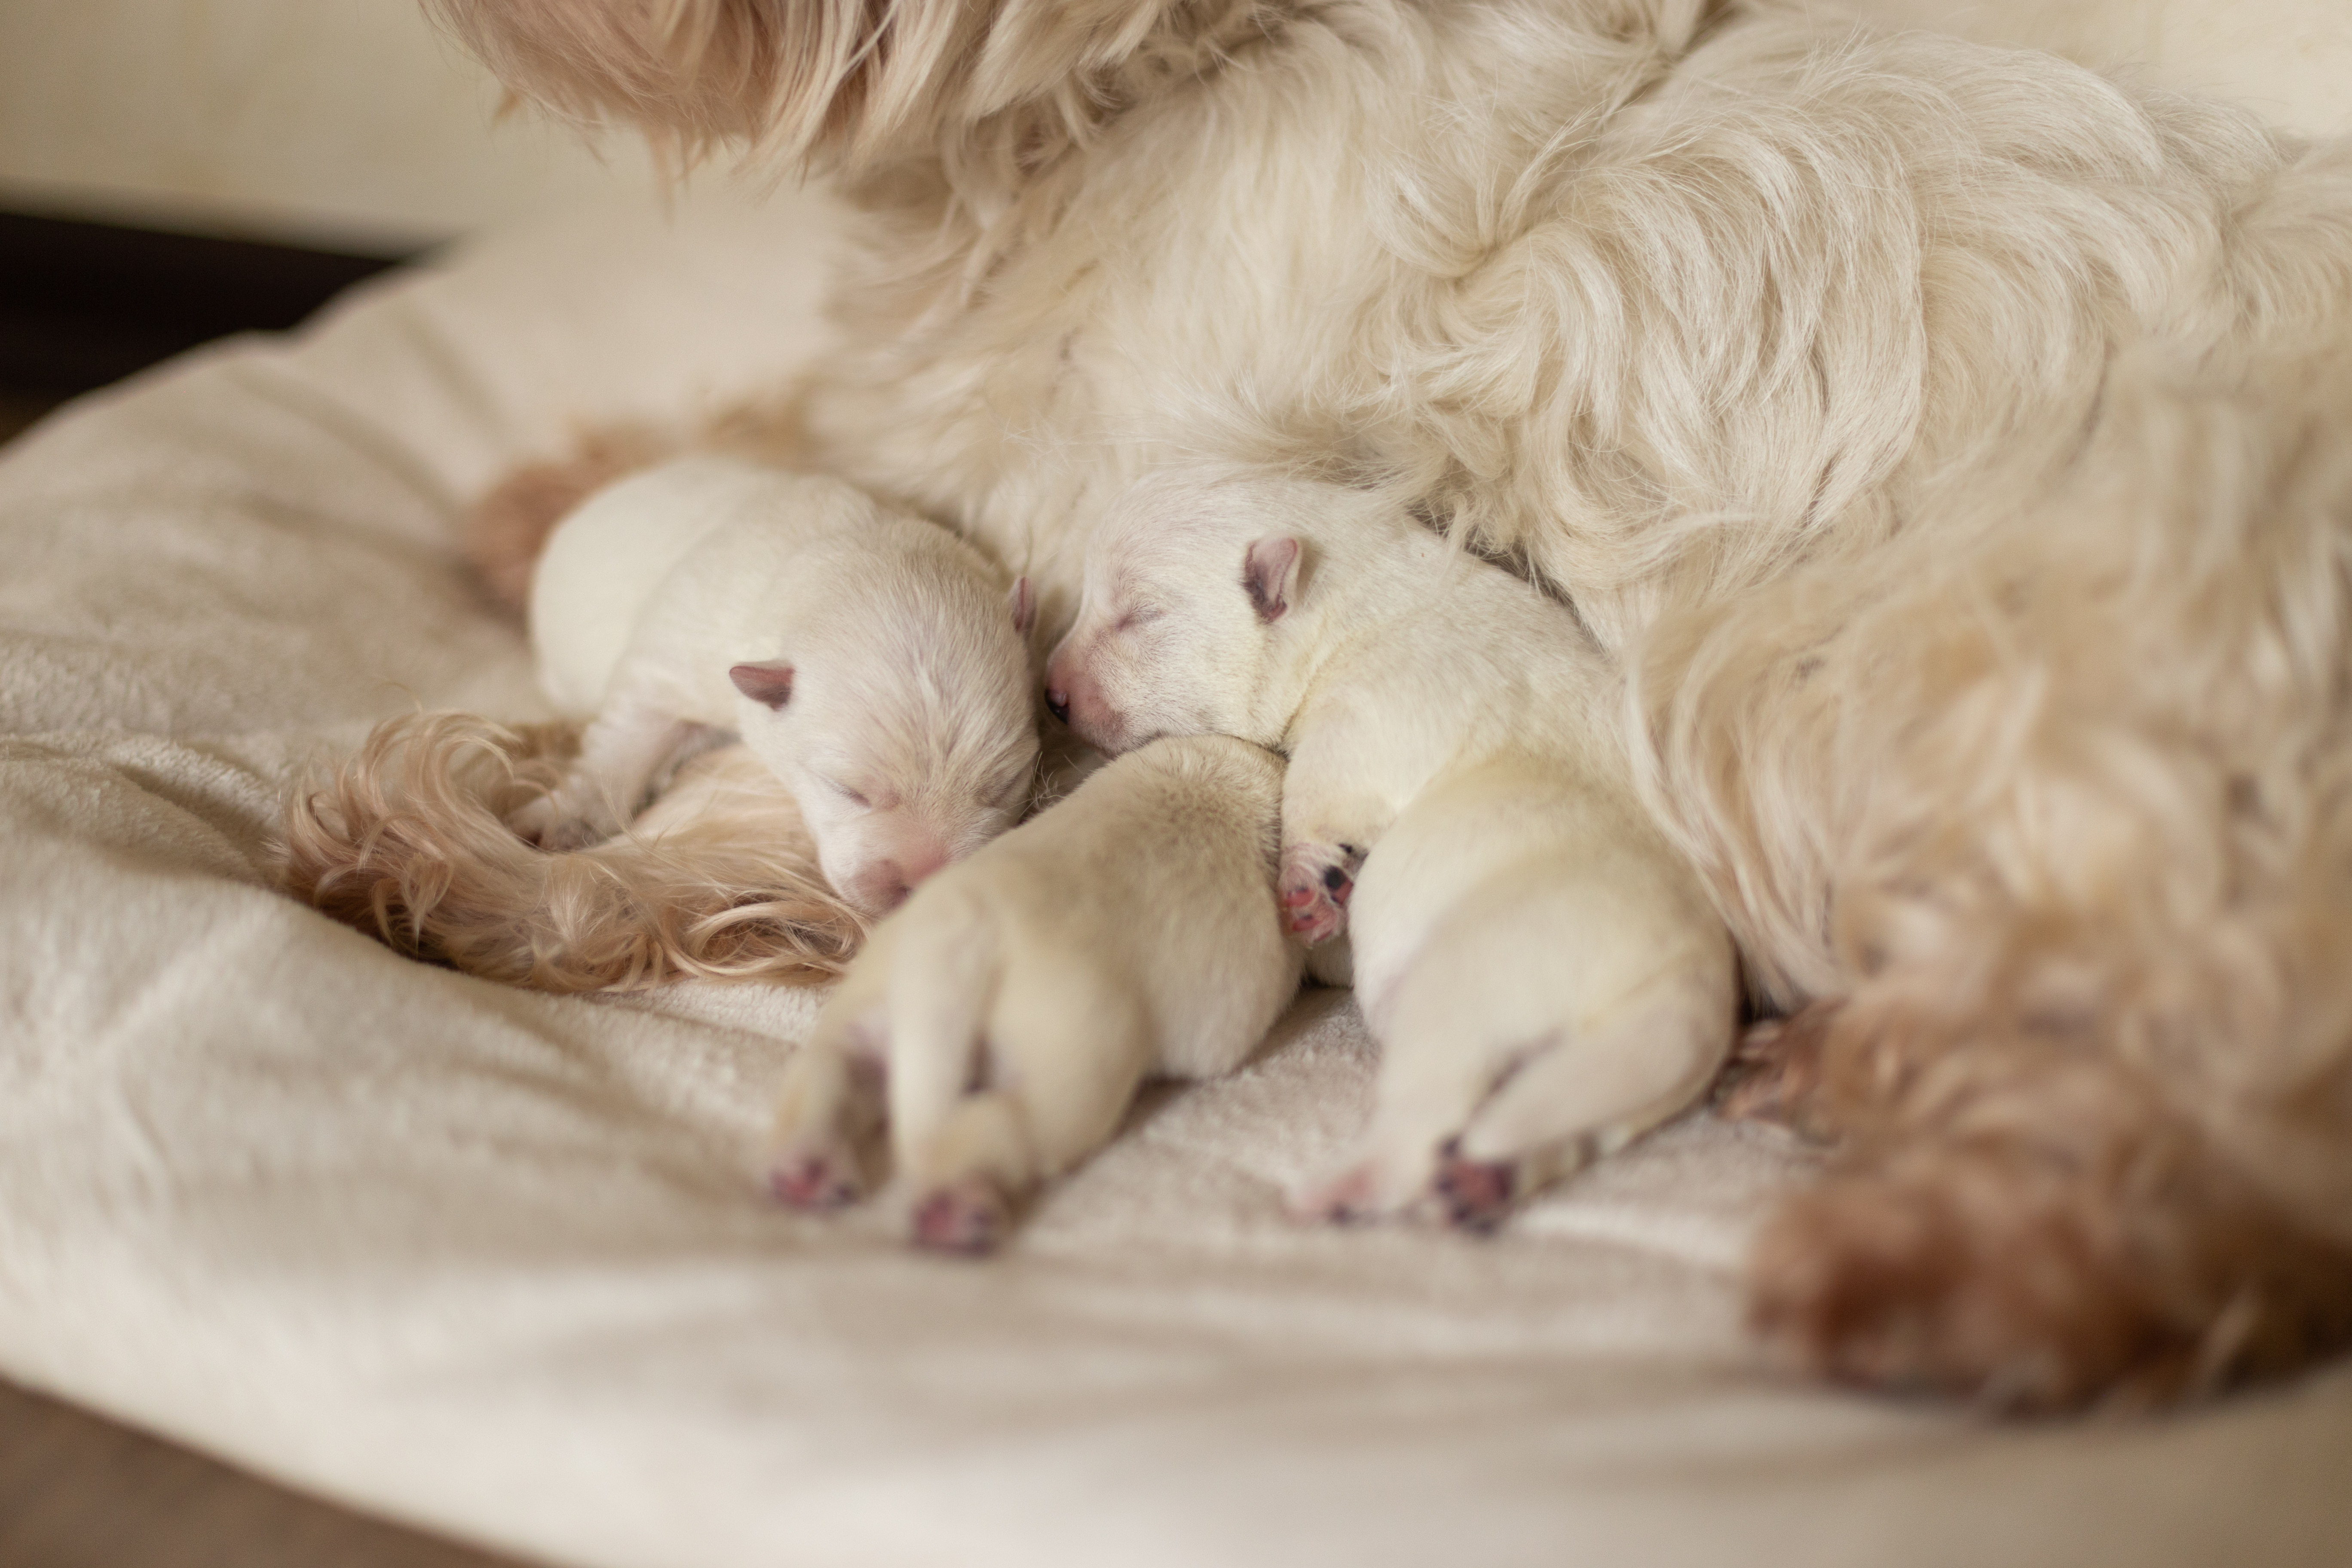 what should i feed my dog after she gives birth